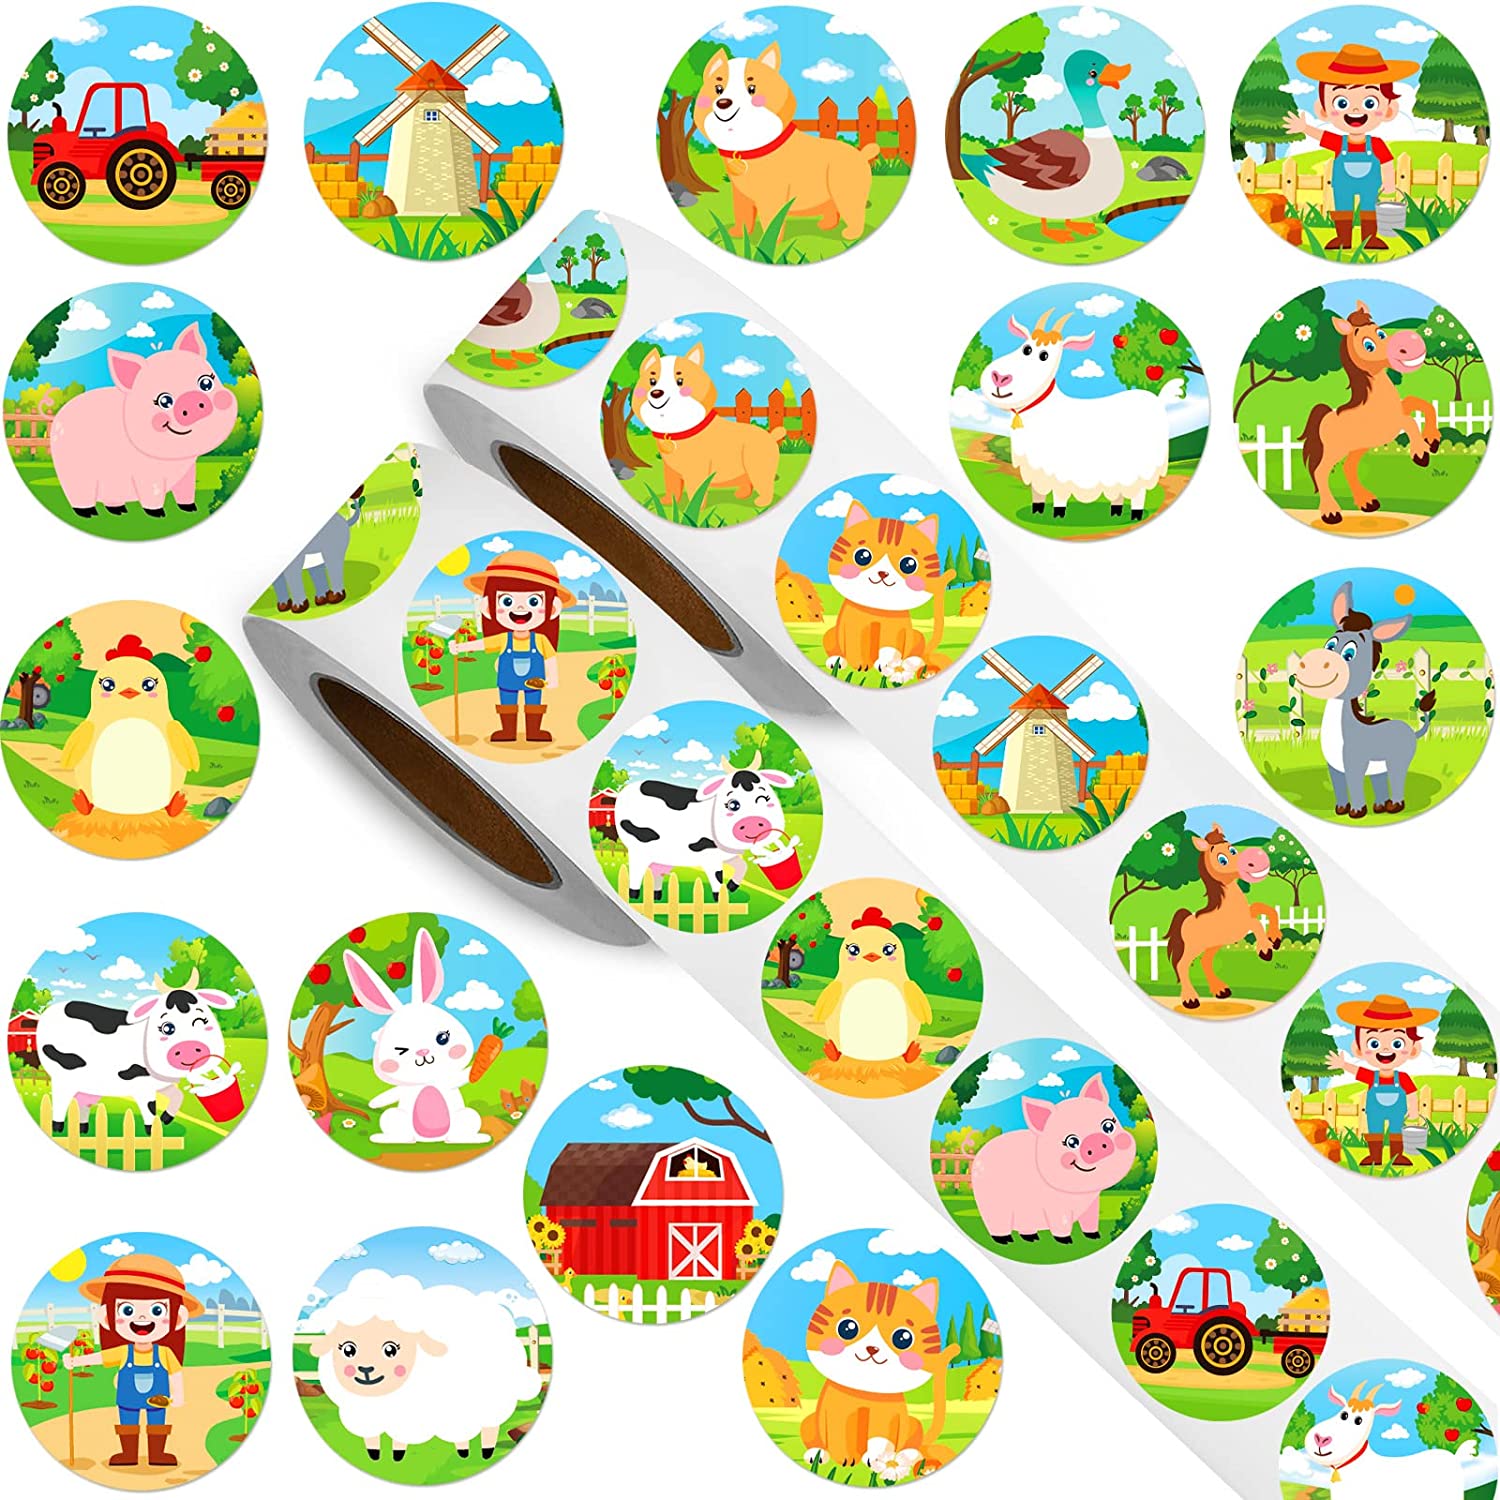 Invites etc. Kids On The Farm 15 x 50mm Round PERSONALISED Glossy Stickers/Sticky Labels-Party Bag Seals 